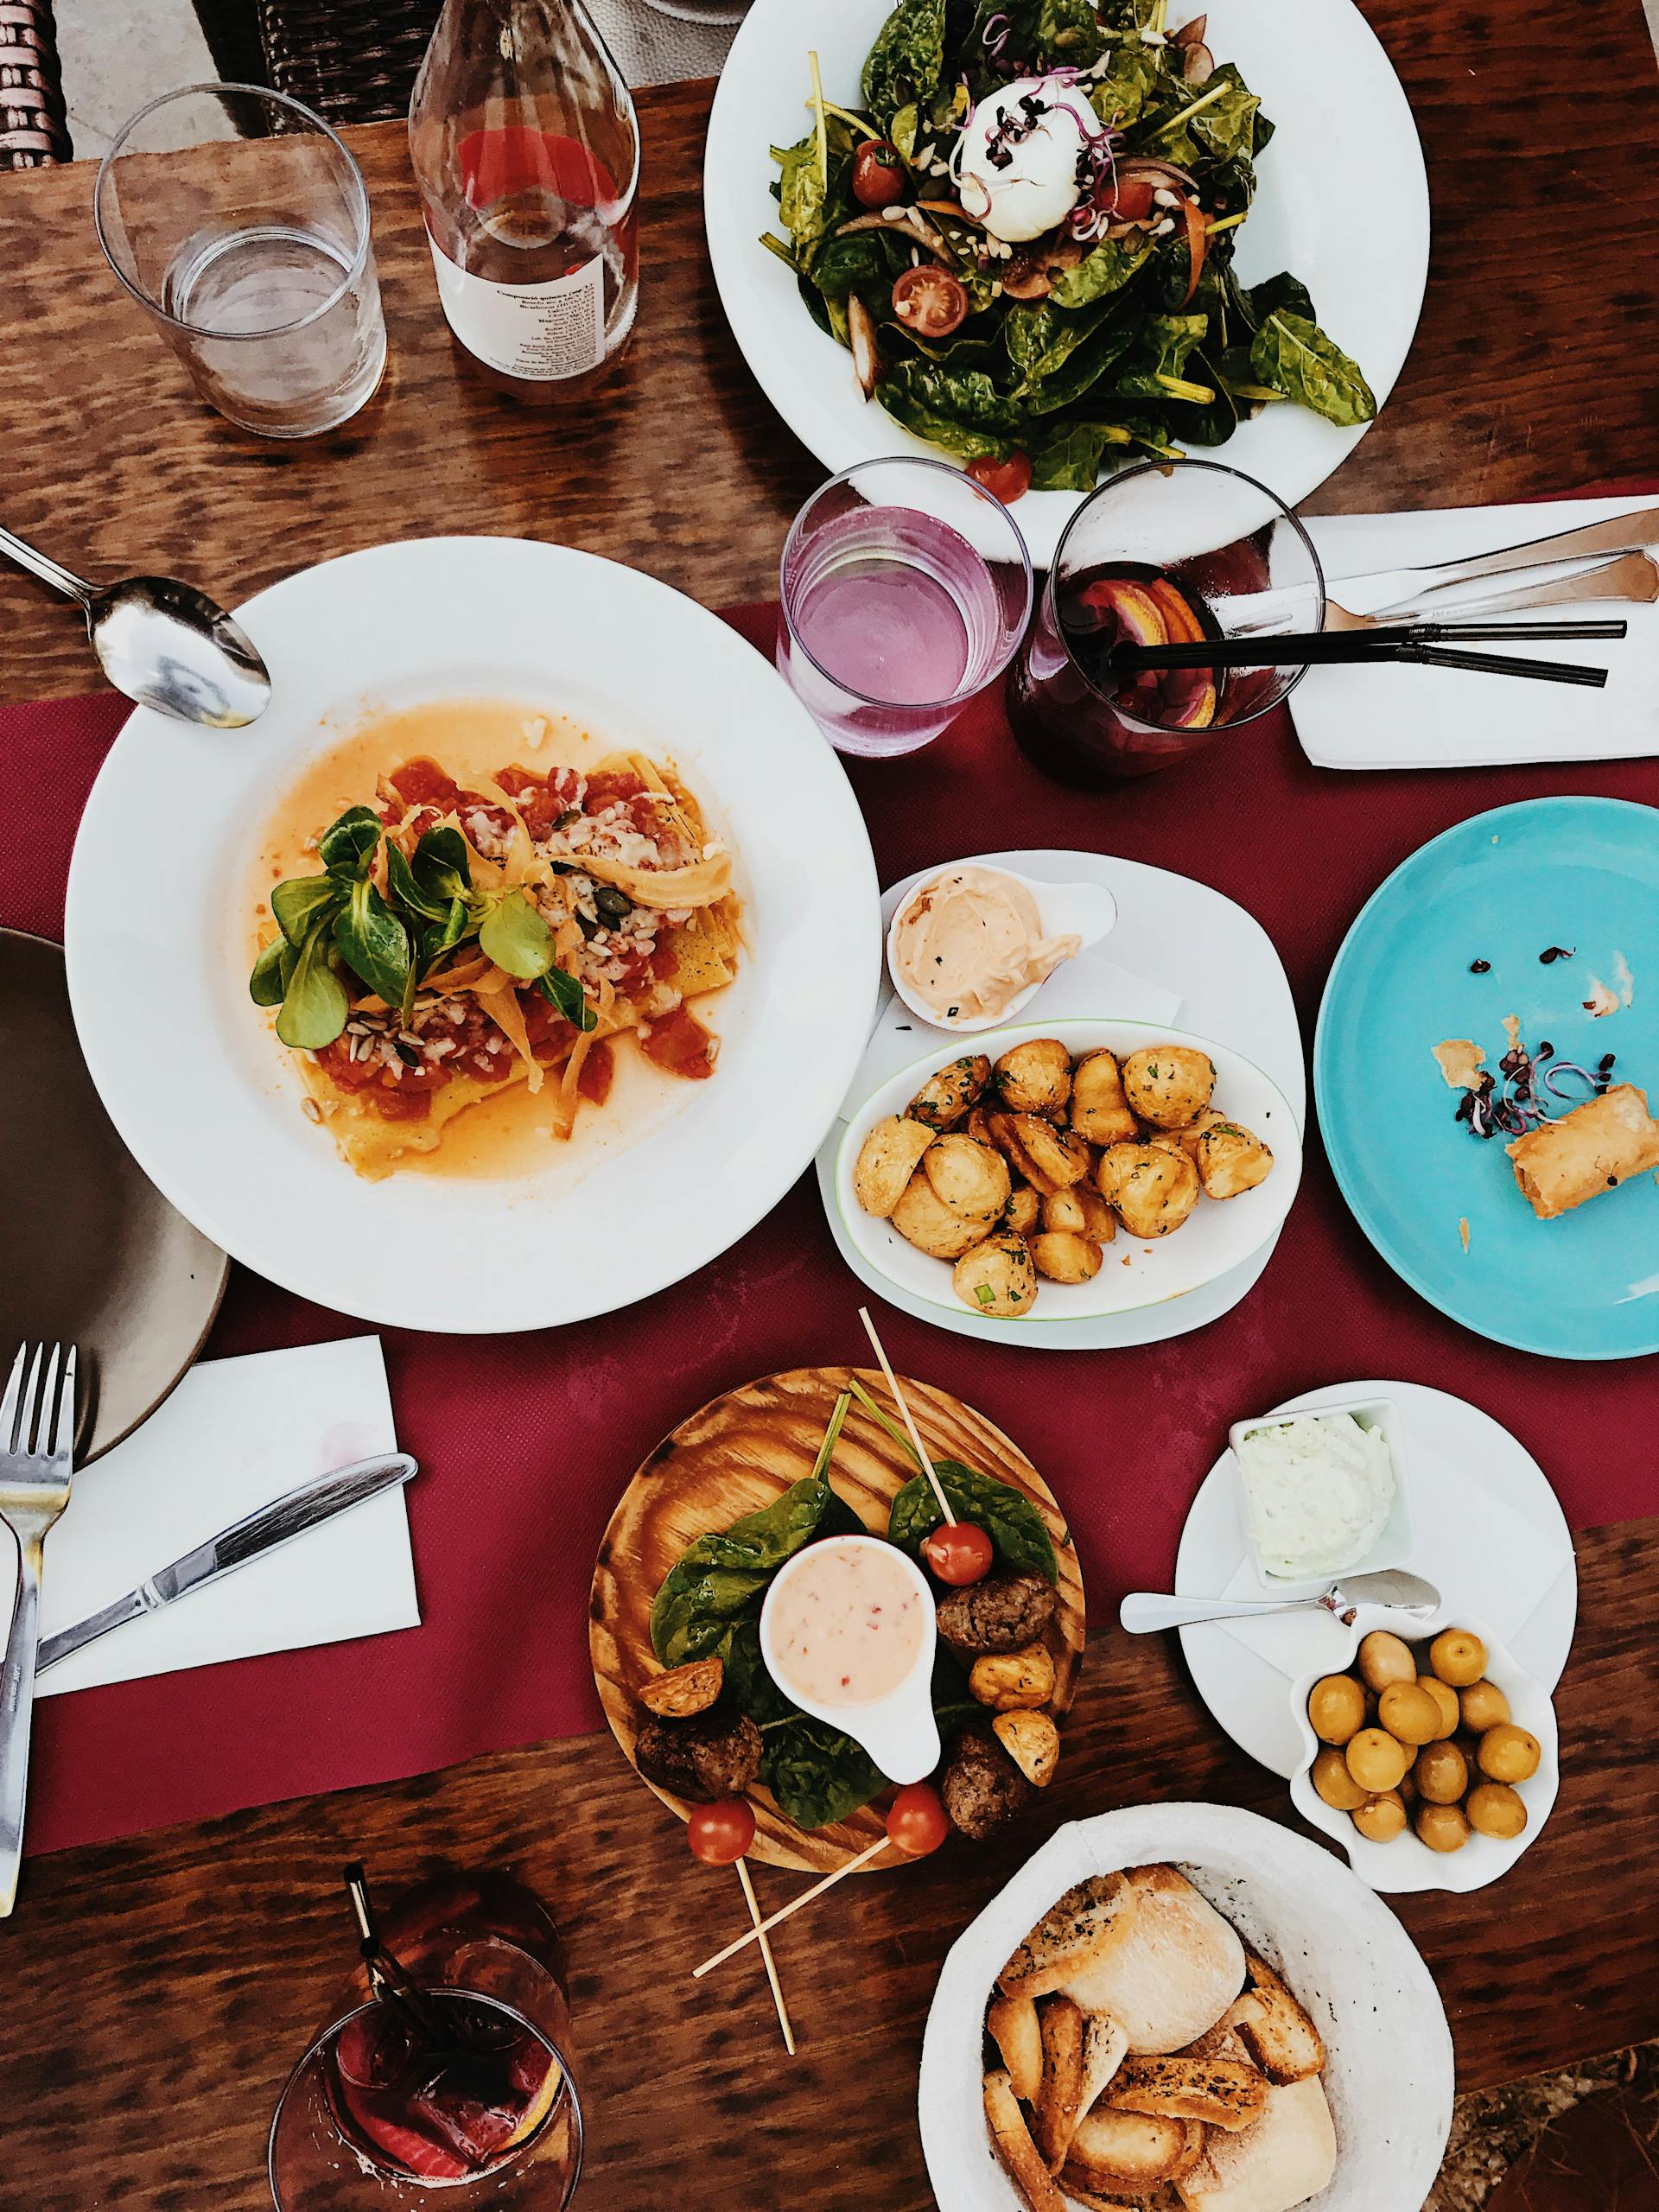 A photo showing dinner served on a table | Source: Pexels